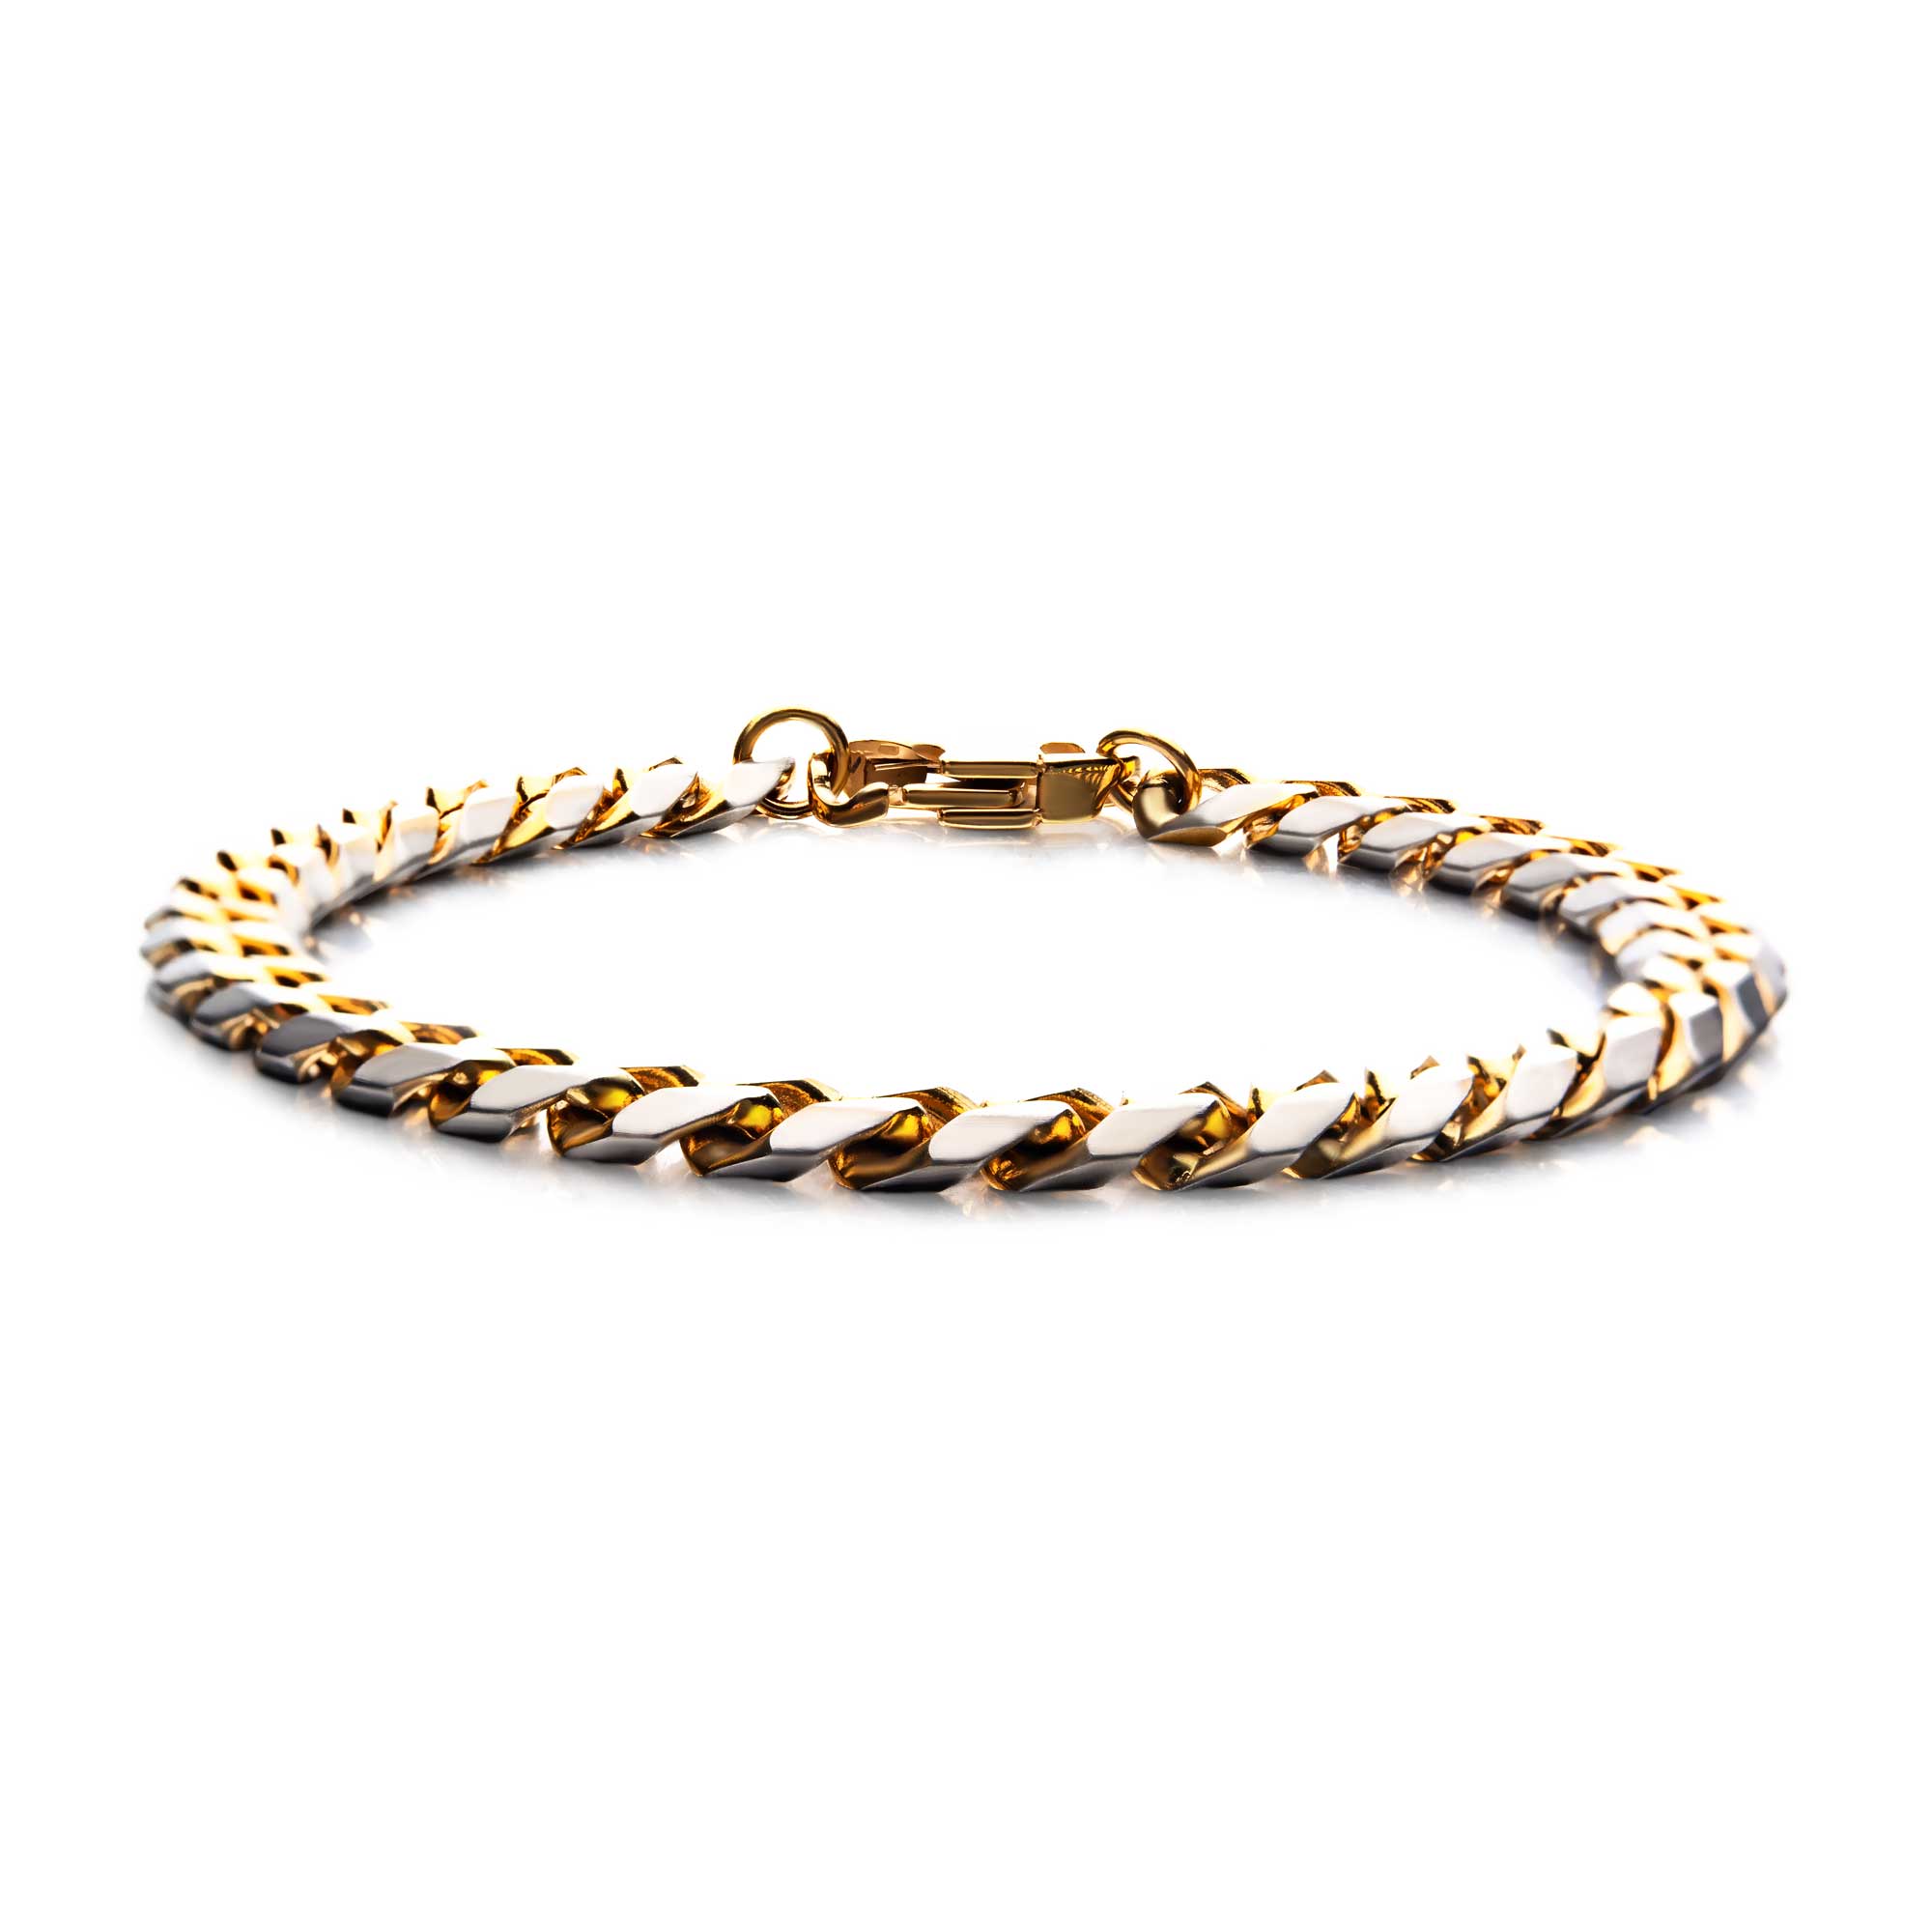 Stainless Steel Gold Plated 8mm Curb Chain with Lobster Clasp P.K. Bennett Jewelers Mundelein, IL